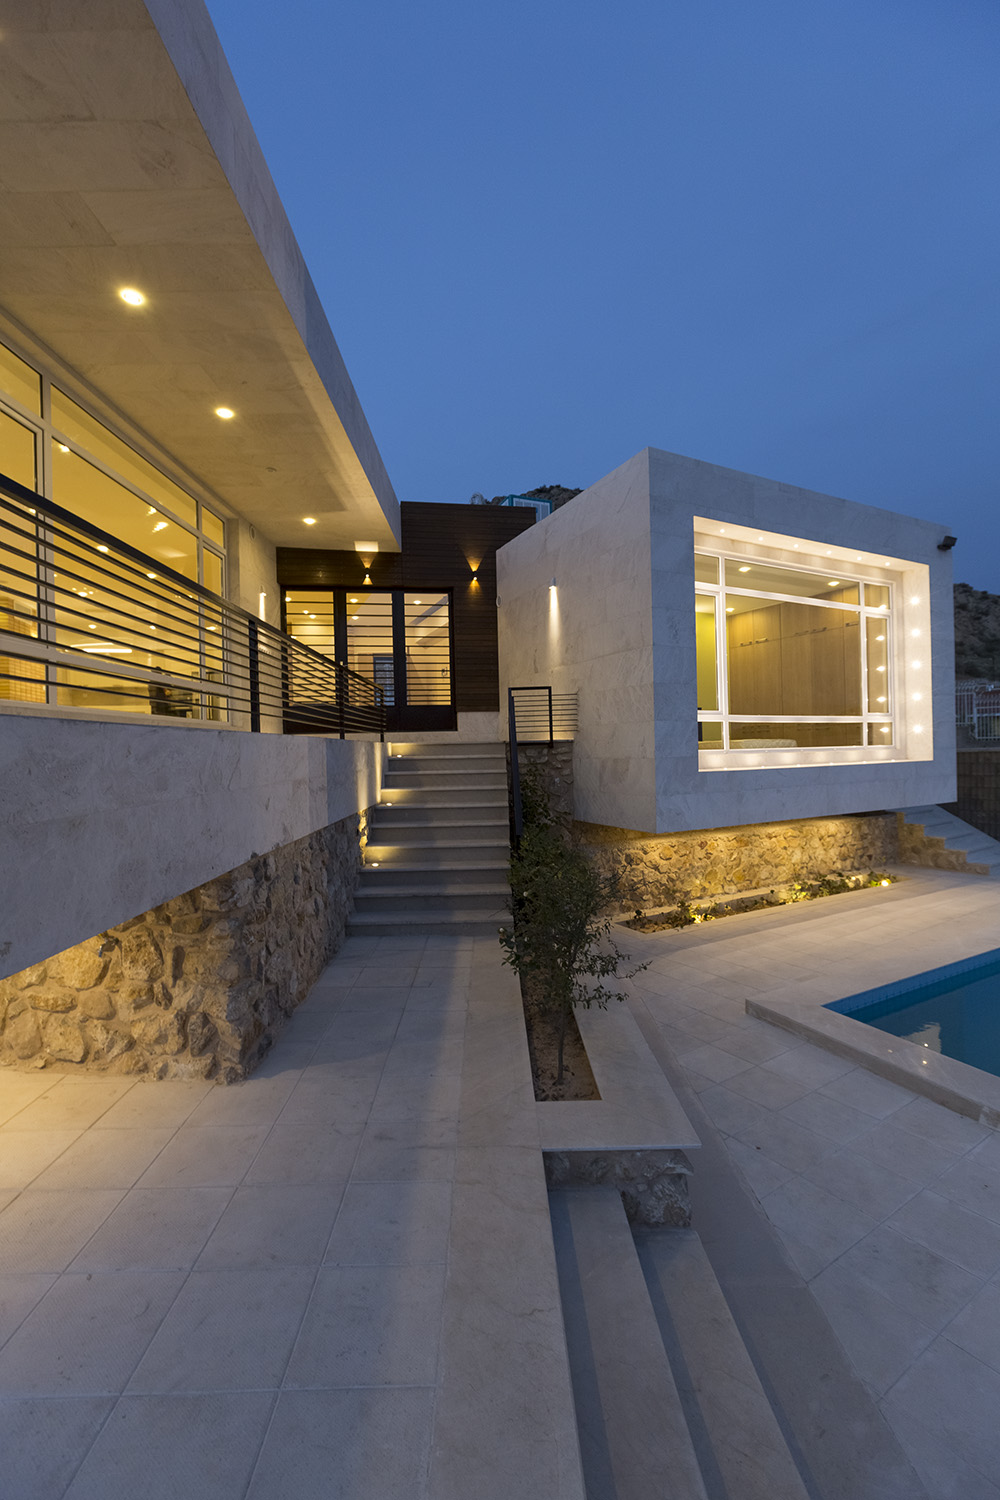 picture no. 2 ofVilla No. 02 project, designed by Ahmad Ghodsimanesh & Partners